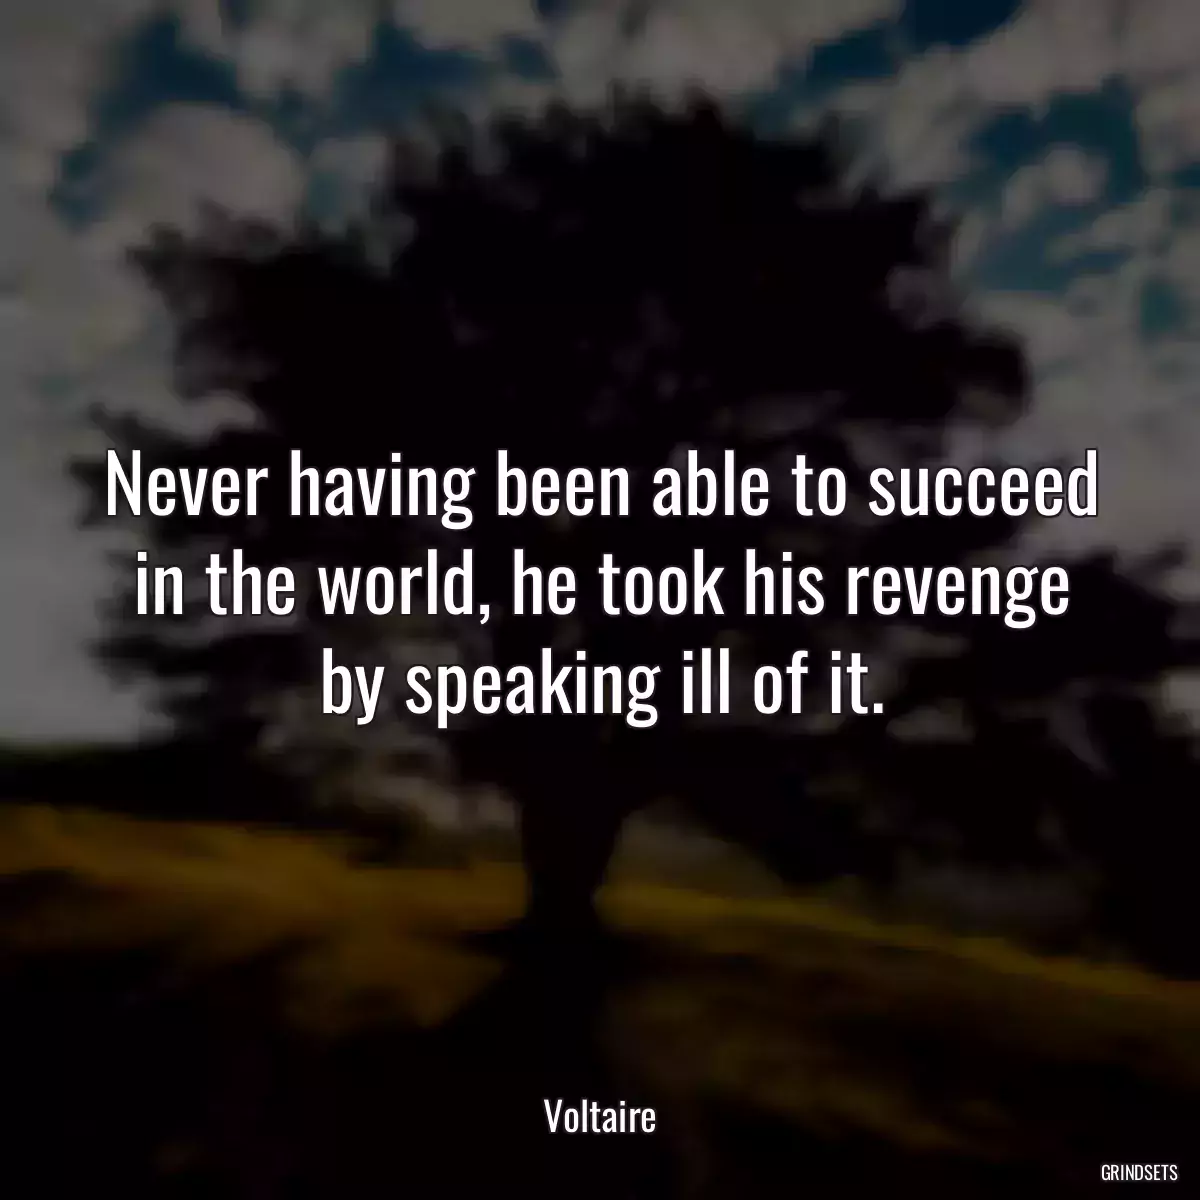 Never having been able to succeed in the world, he took his revenge by speaking ill of it.